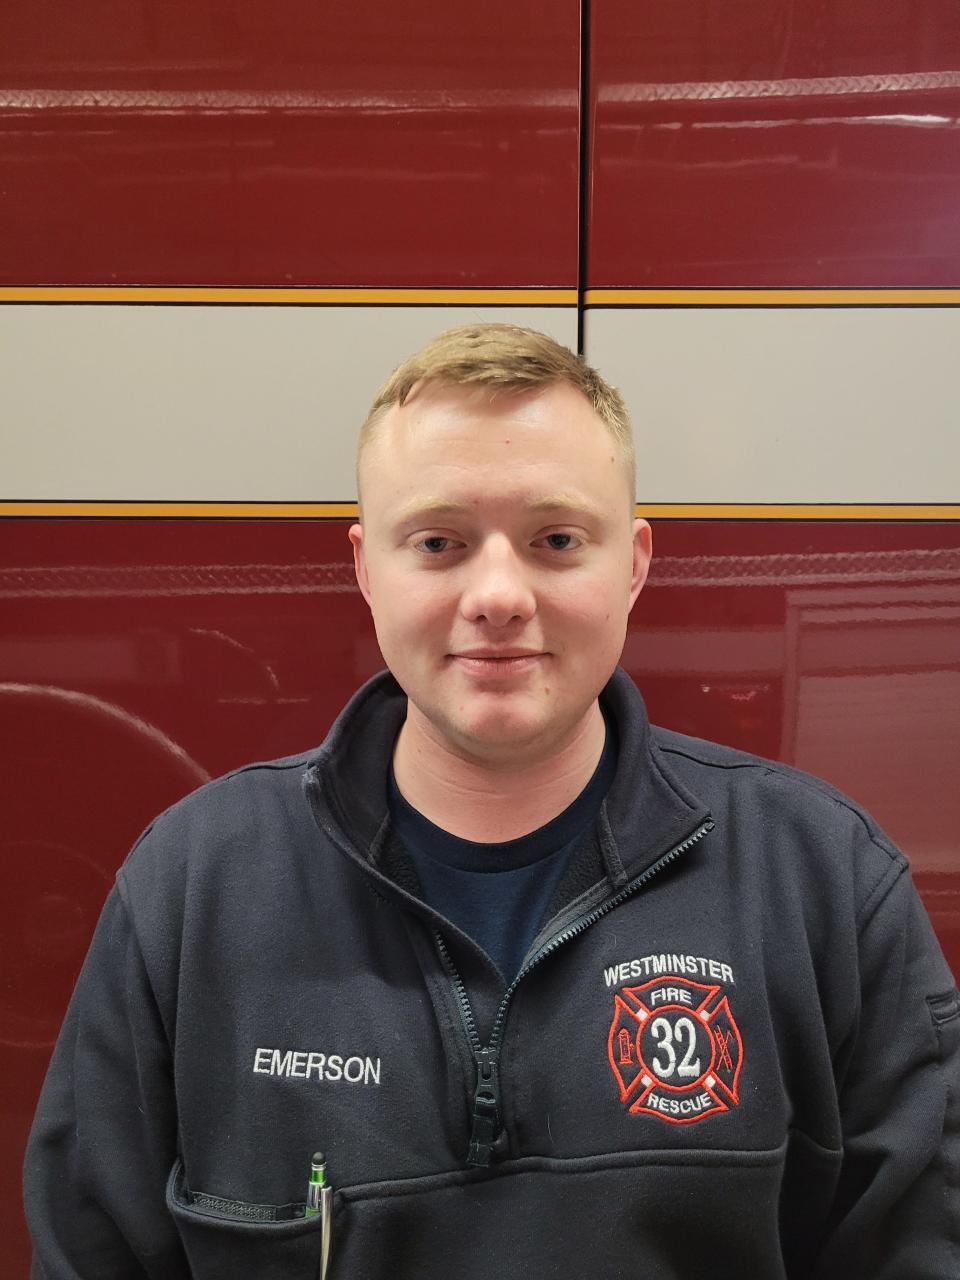 Joshua Emerson has worked with Westminster Fire Department for the past four years as a full-time firefighter. He was promoted to be the fire group one lieutenant.